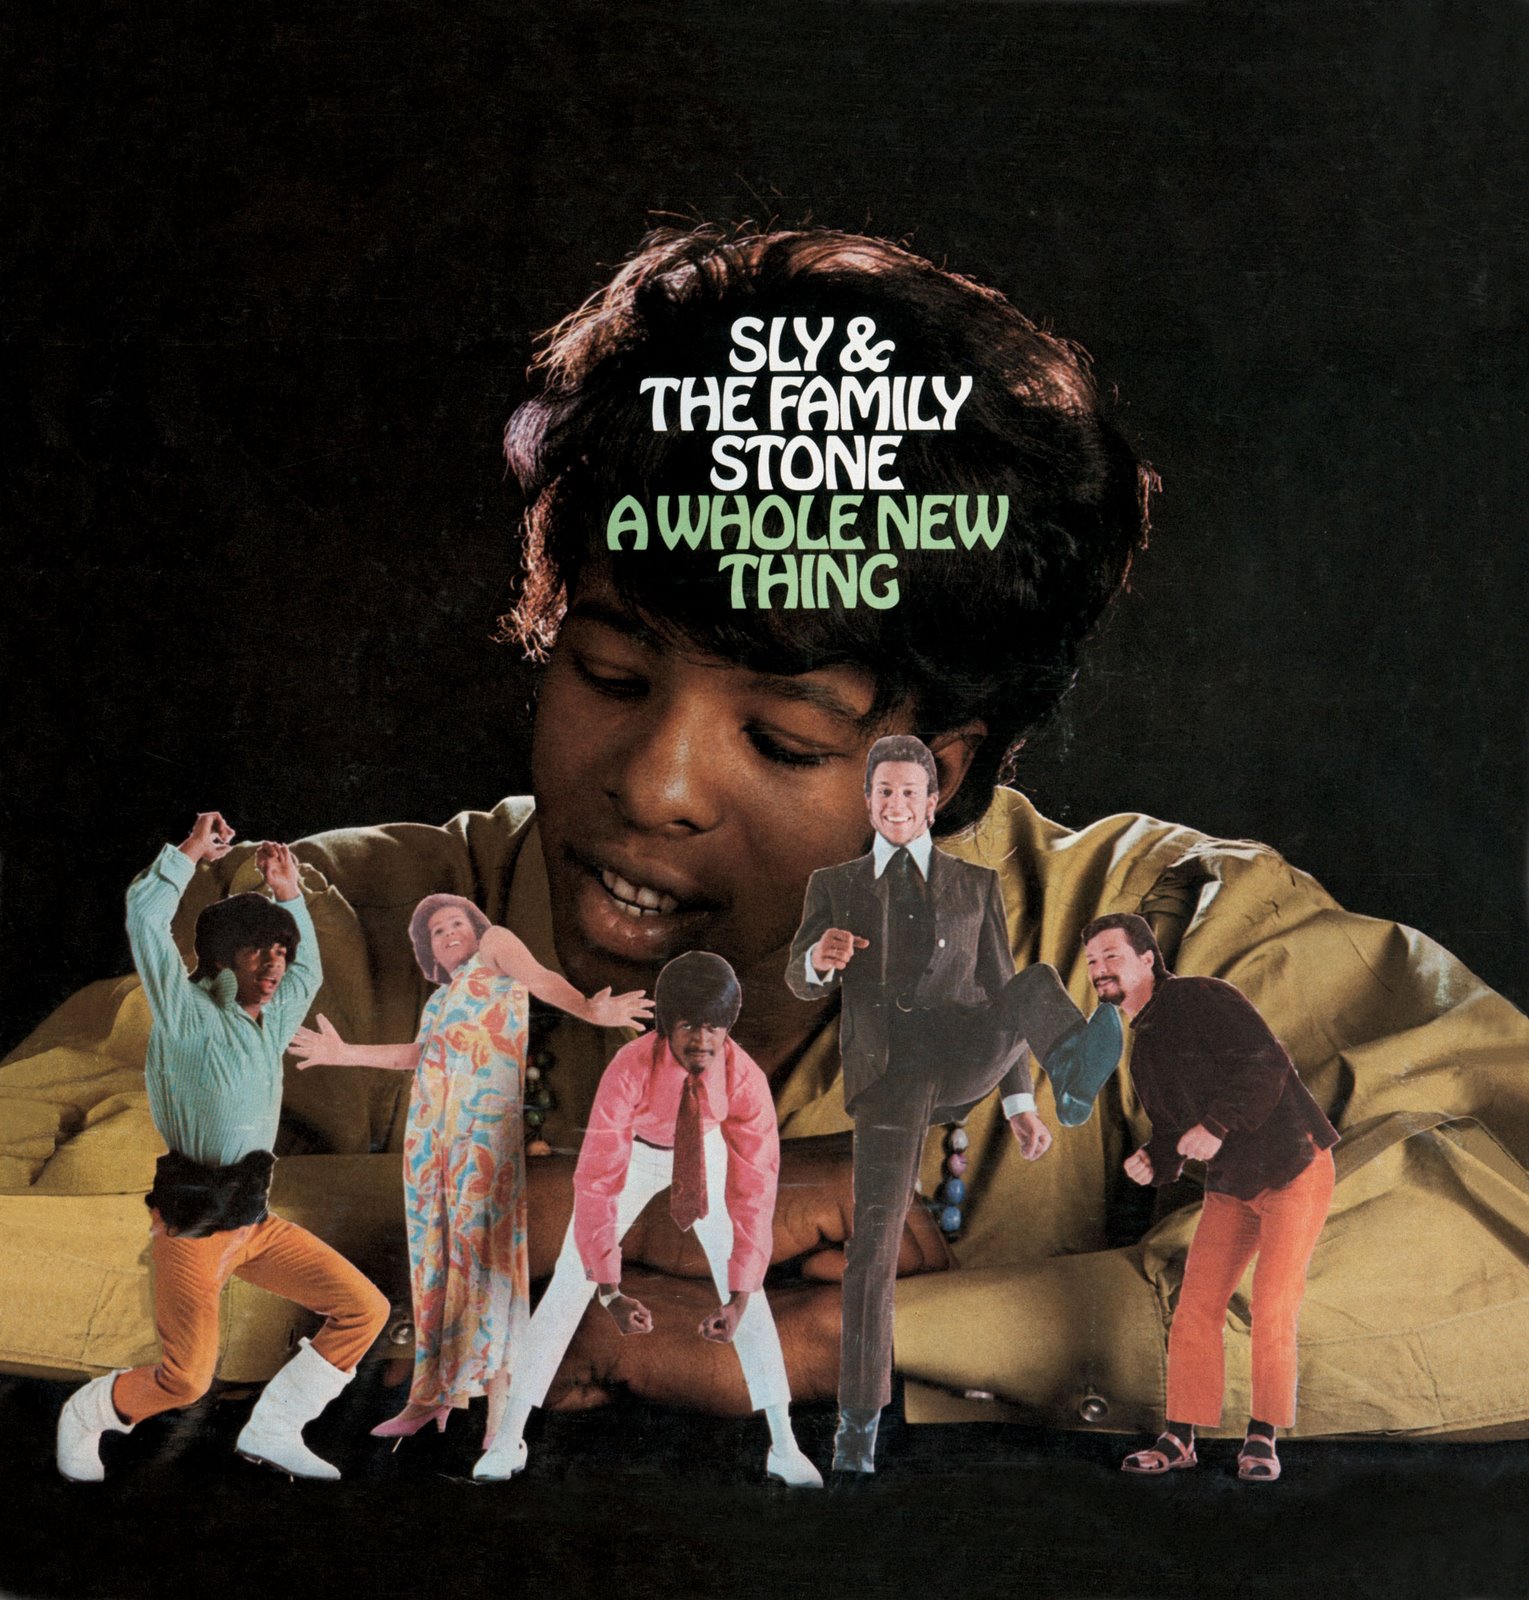 [Sly+&+The+Family+Stone+-+A+Whole+New+Thing+-+Cover.JPG]